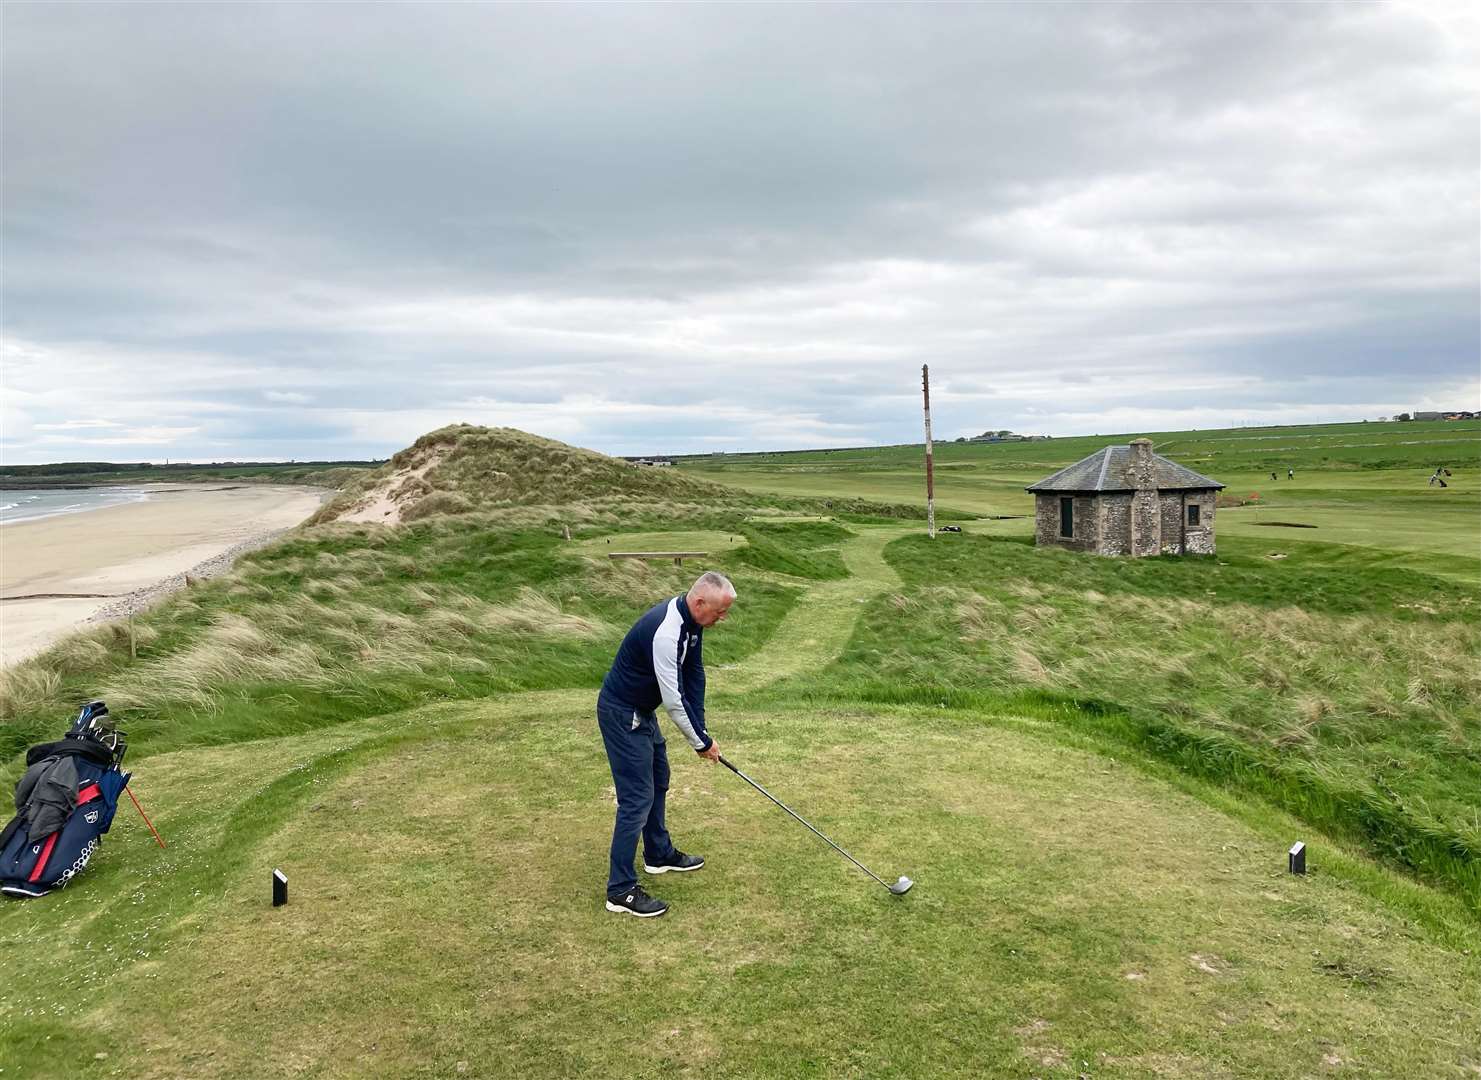 Graham Harness, round one leader of the NC500 Links Open, teeing off on the 17th hole at Wick.